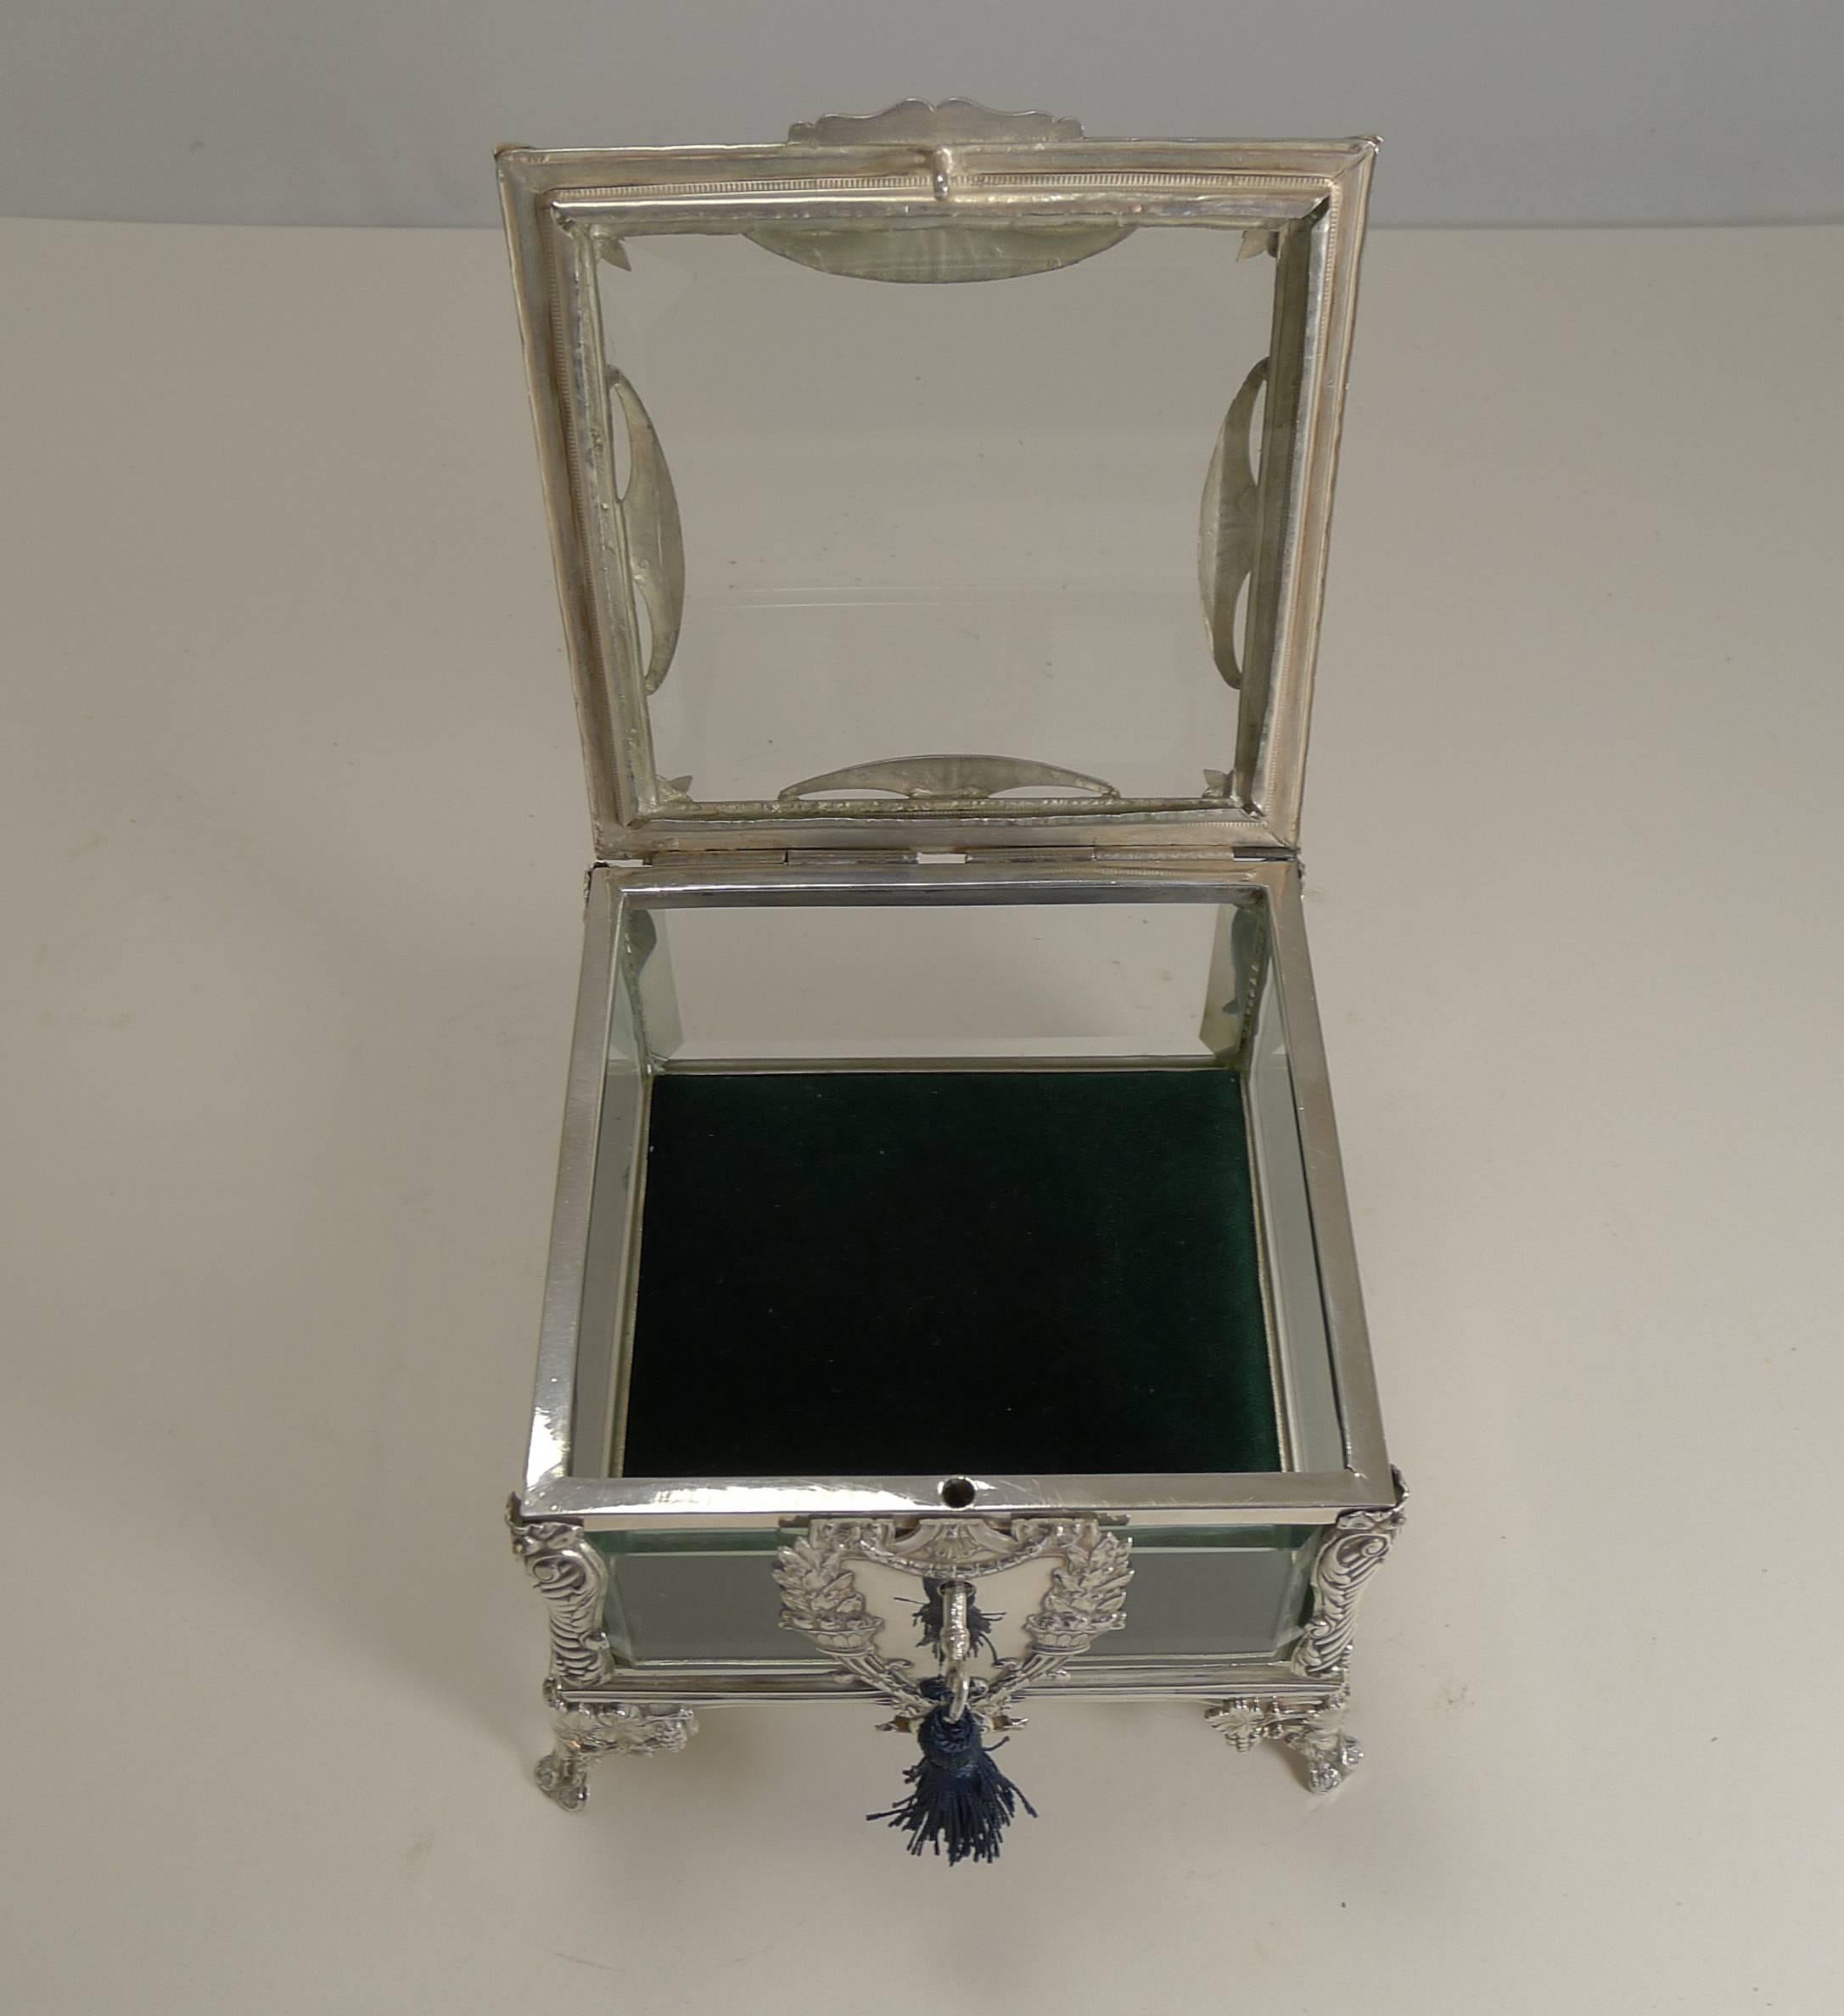 French Art Nouveau Silver Plate and Enamel Jewelry Box, circa 1900 5